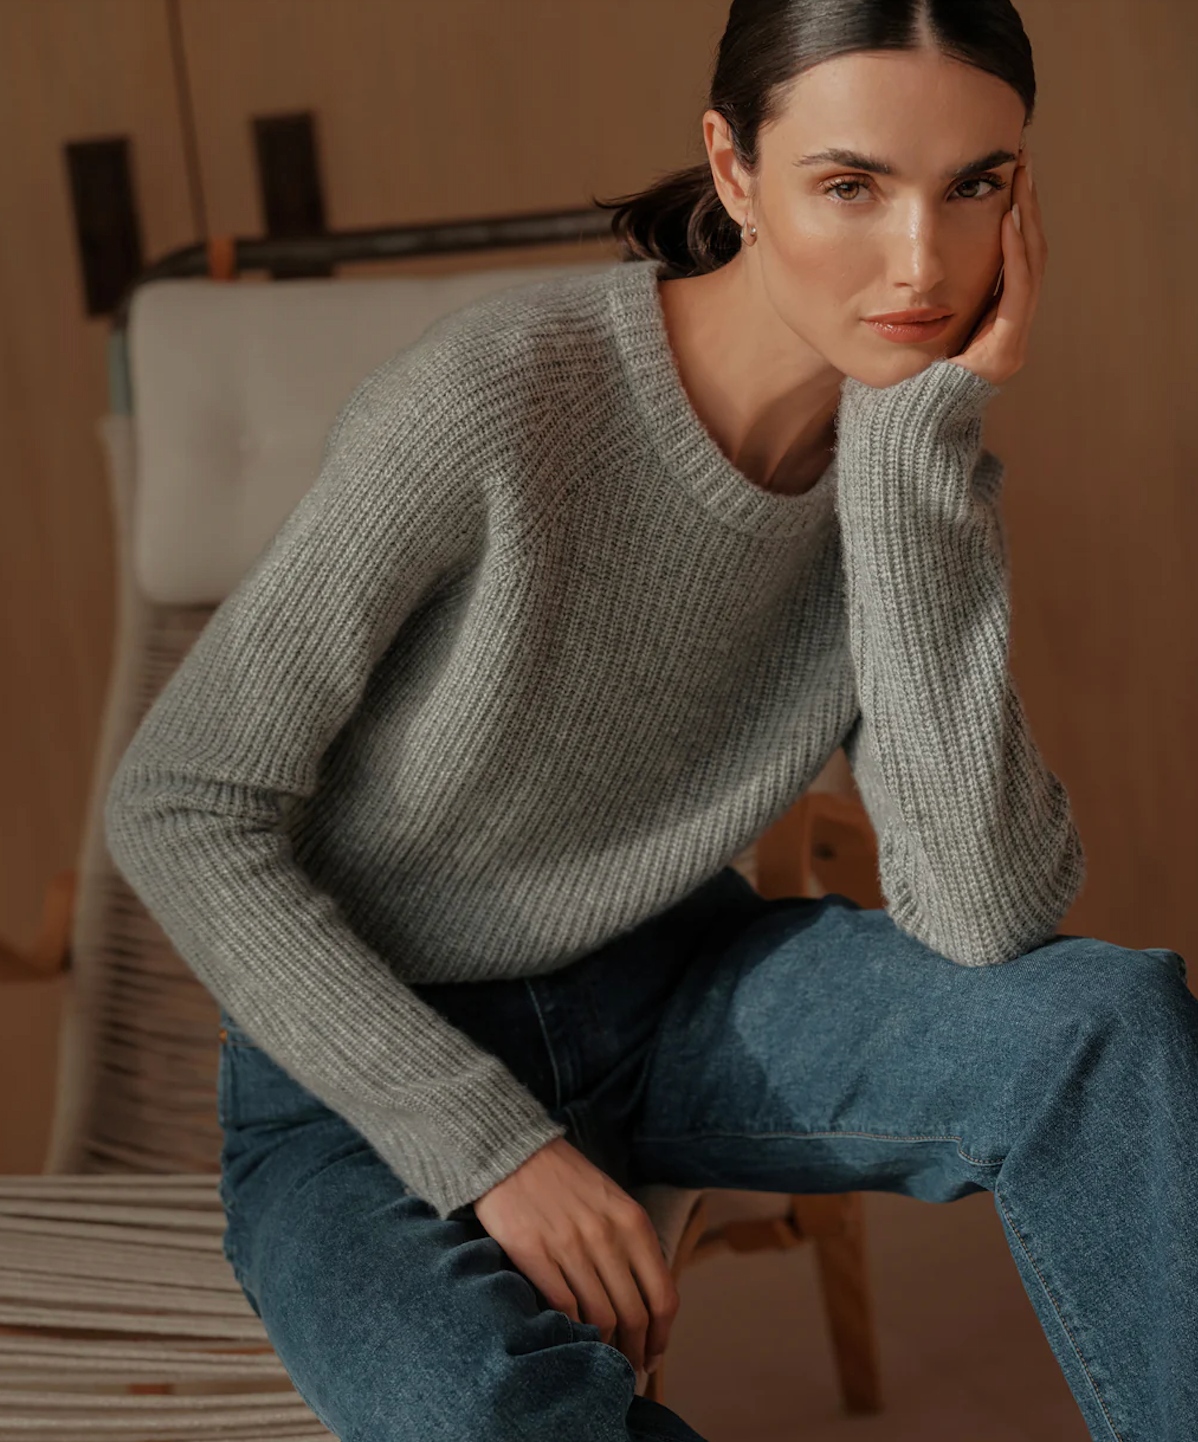 Oversized Sweater for Women, Turtleneck Knitted Sweater, Chunky Knit Sweater  so Warm and Cozy, Perfect for Winter Days 